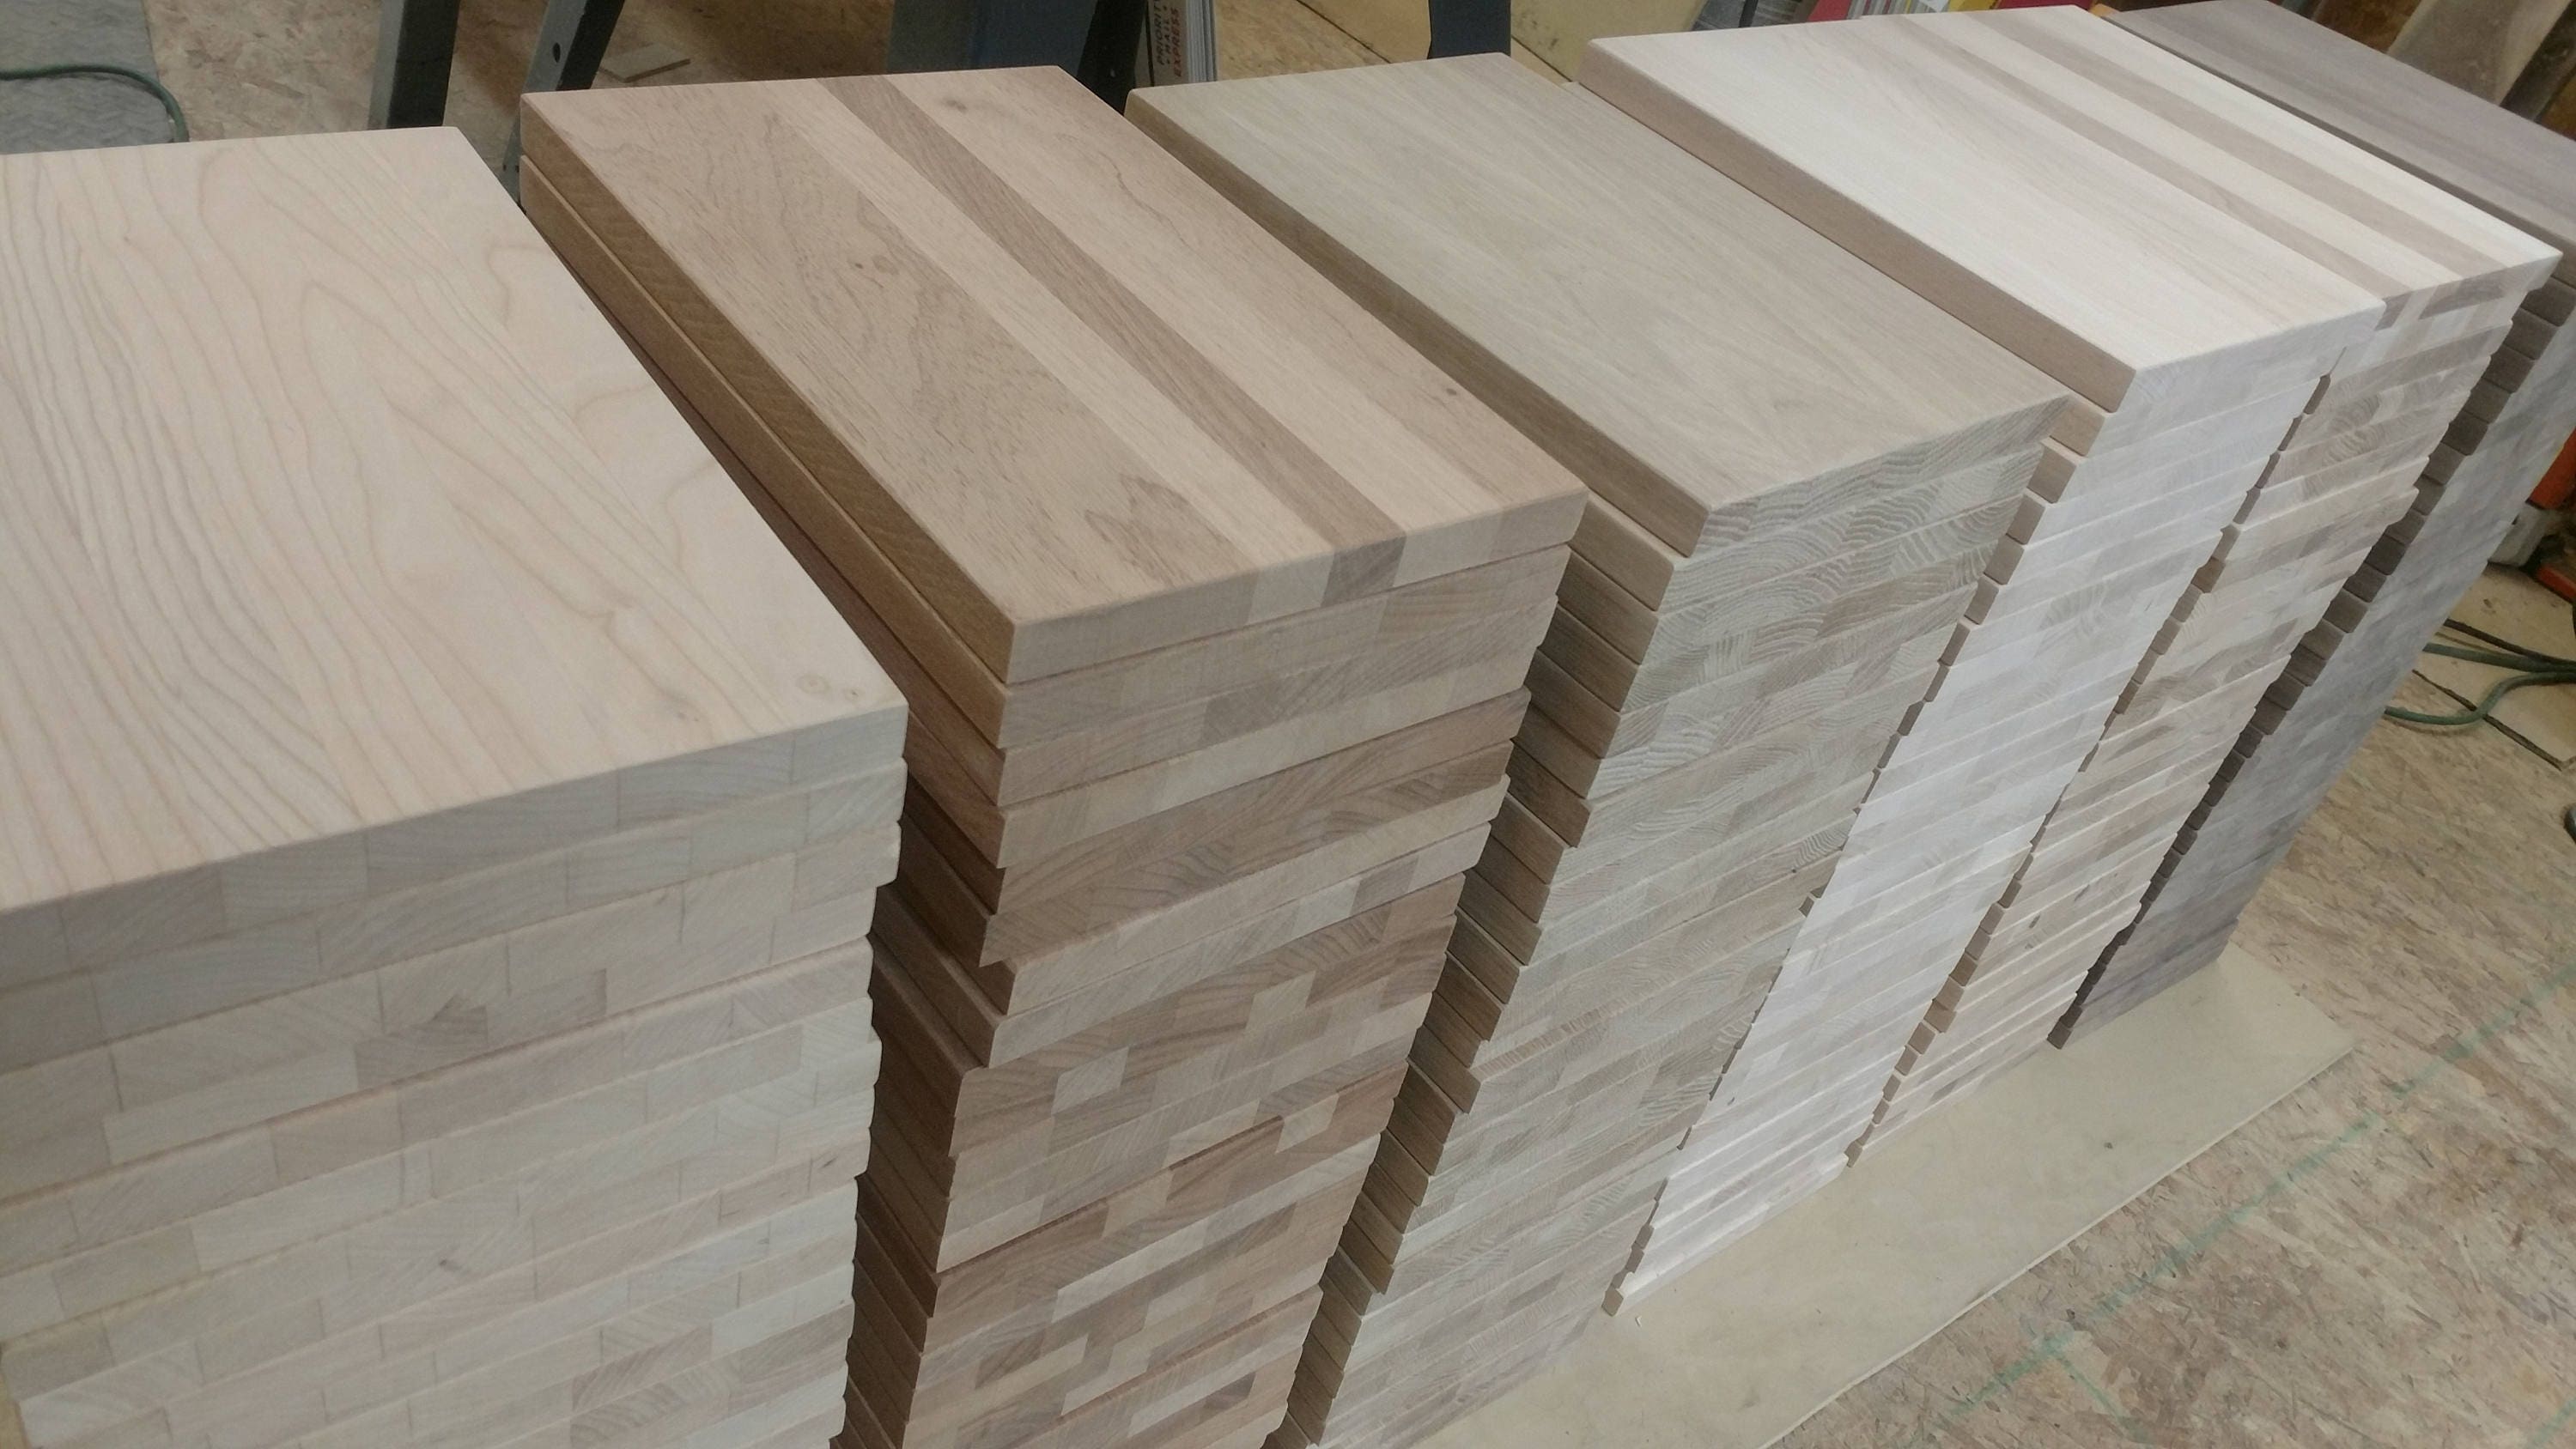 Fastest-Growing Supplier, 2018: Wholesale Cutting Boards